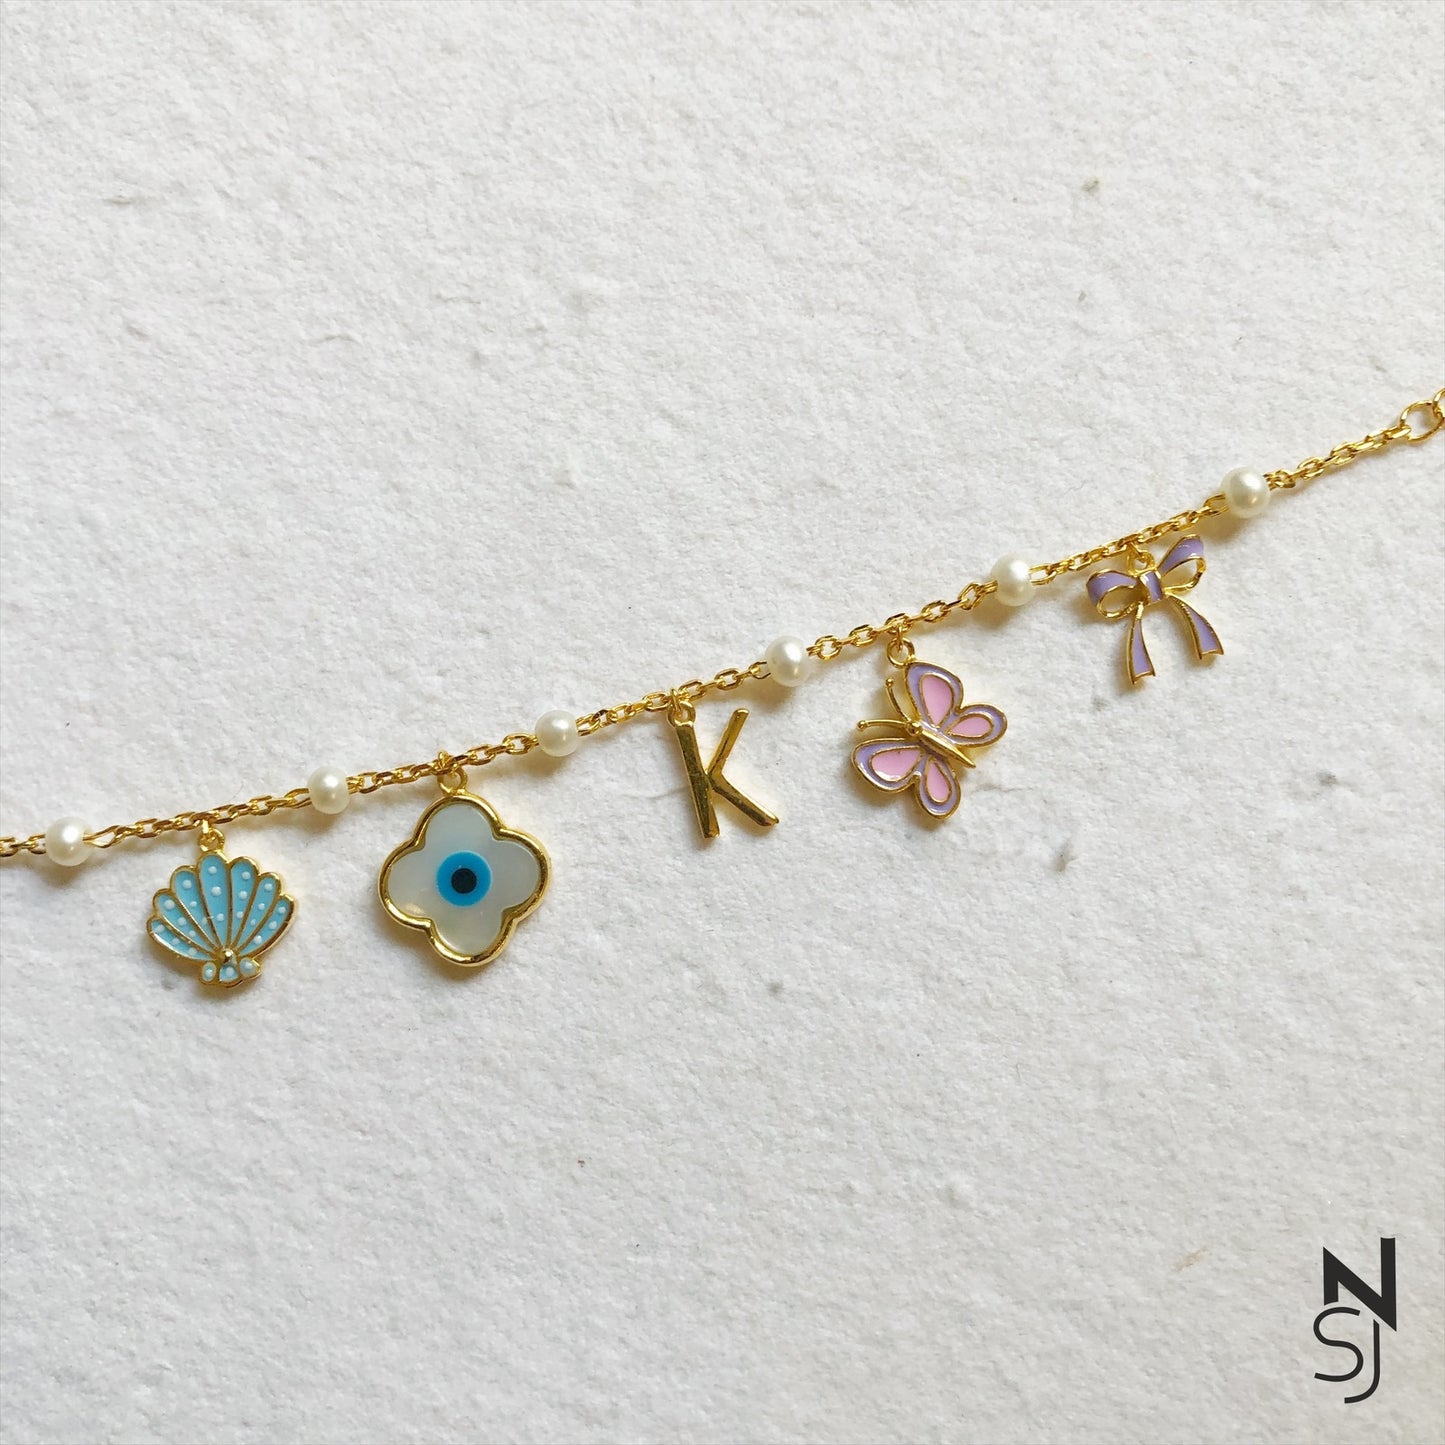 My favourite things Charm Bracelet